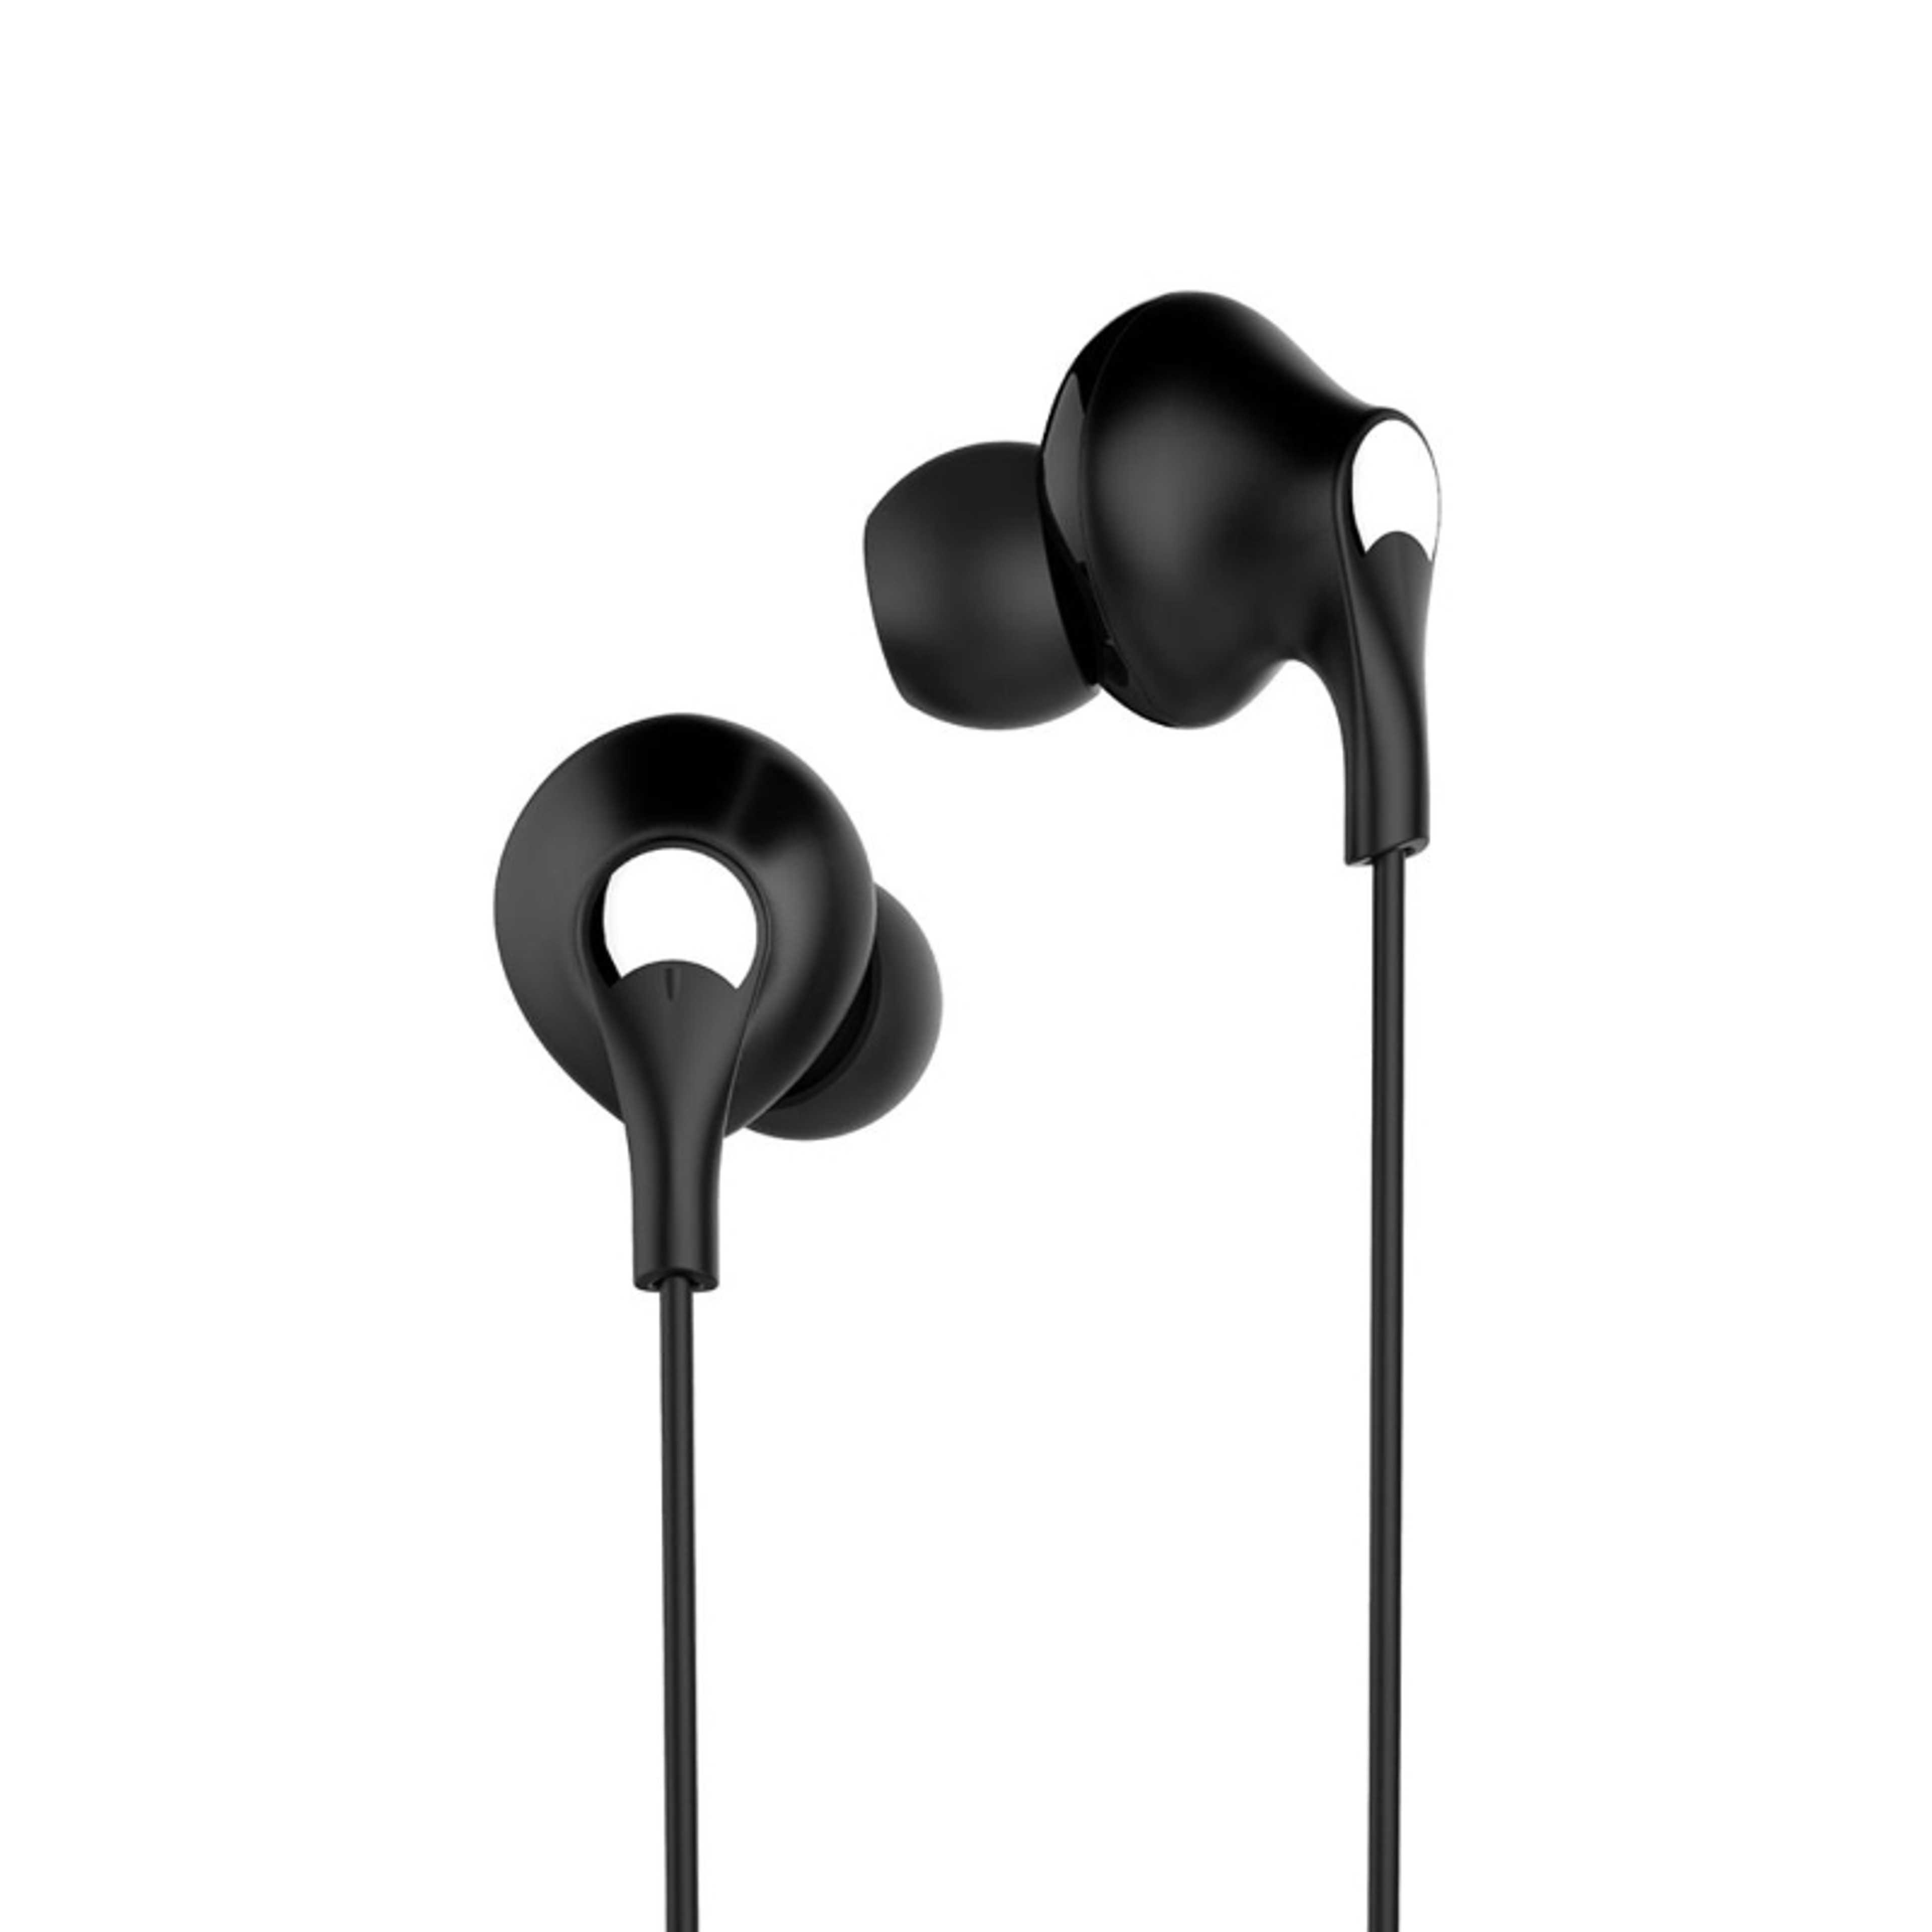 FASTER F13N Stereo & Bass Sound In-Ear Headphones - Faster Handfree, Best Quality Earphones